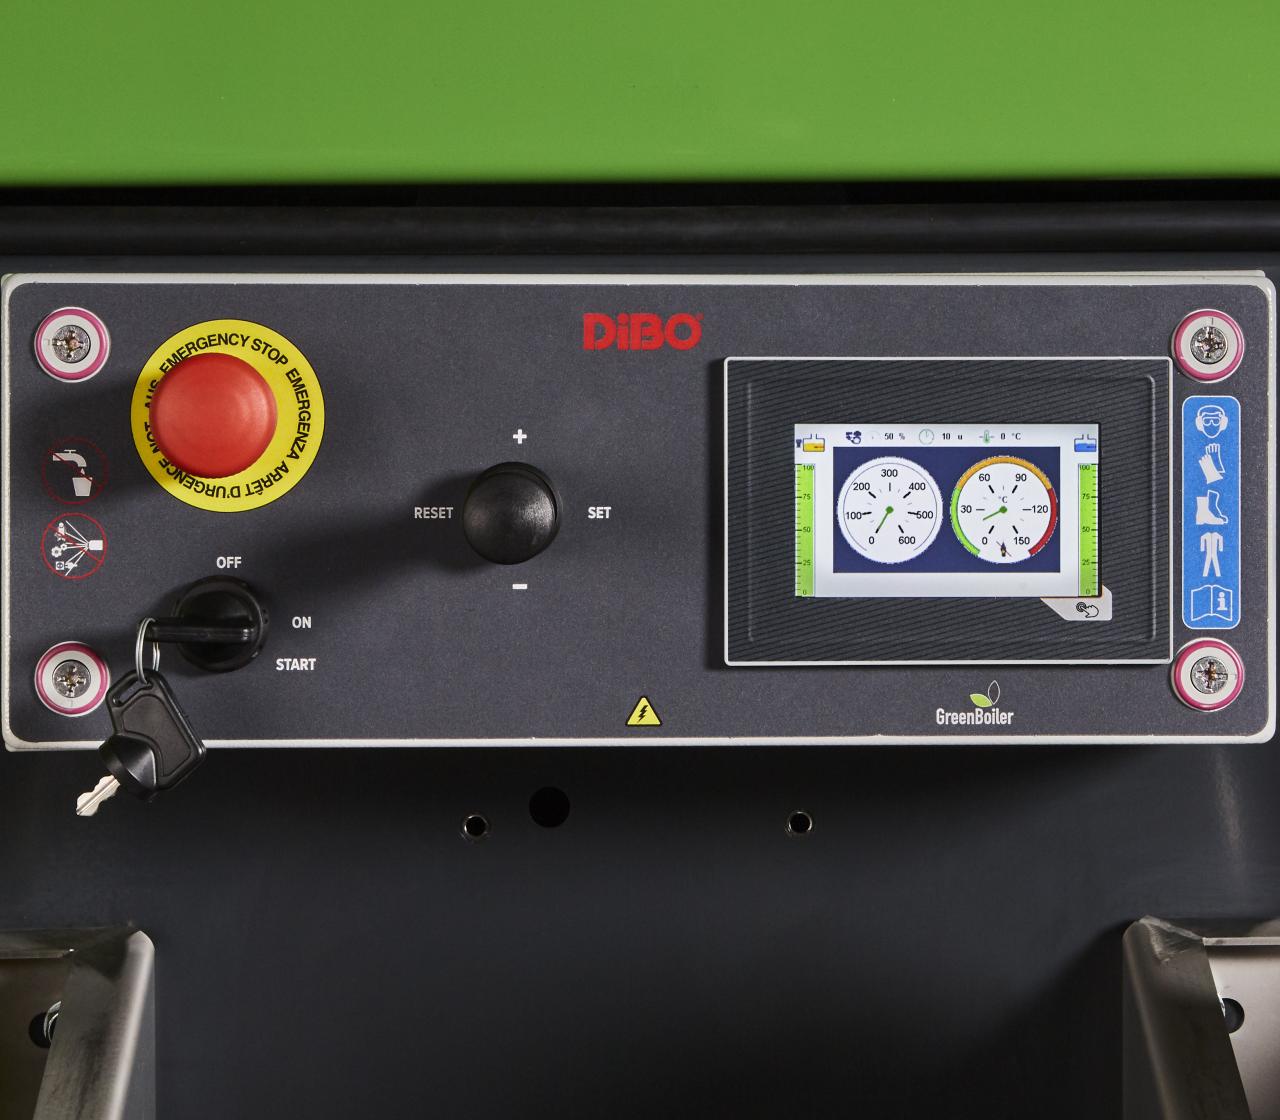 Digital control for the DiBO trailers with joystick for convenient operation with gloves